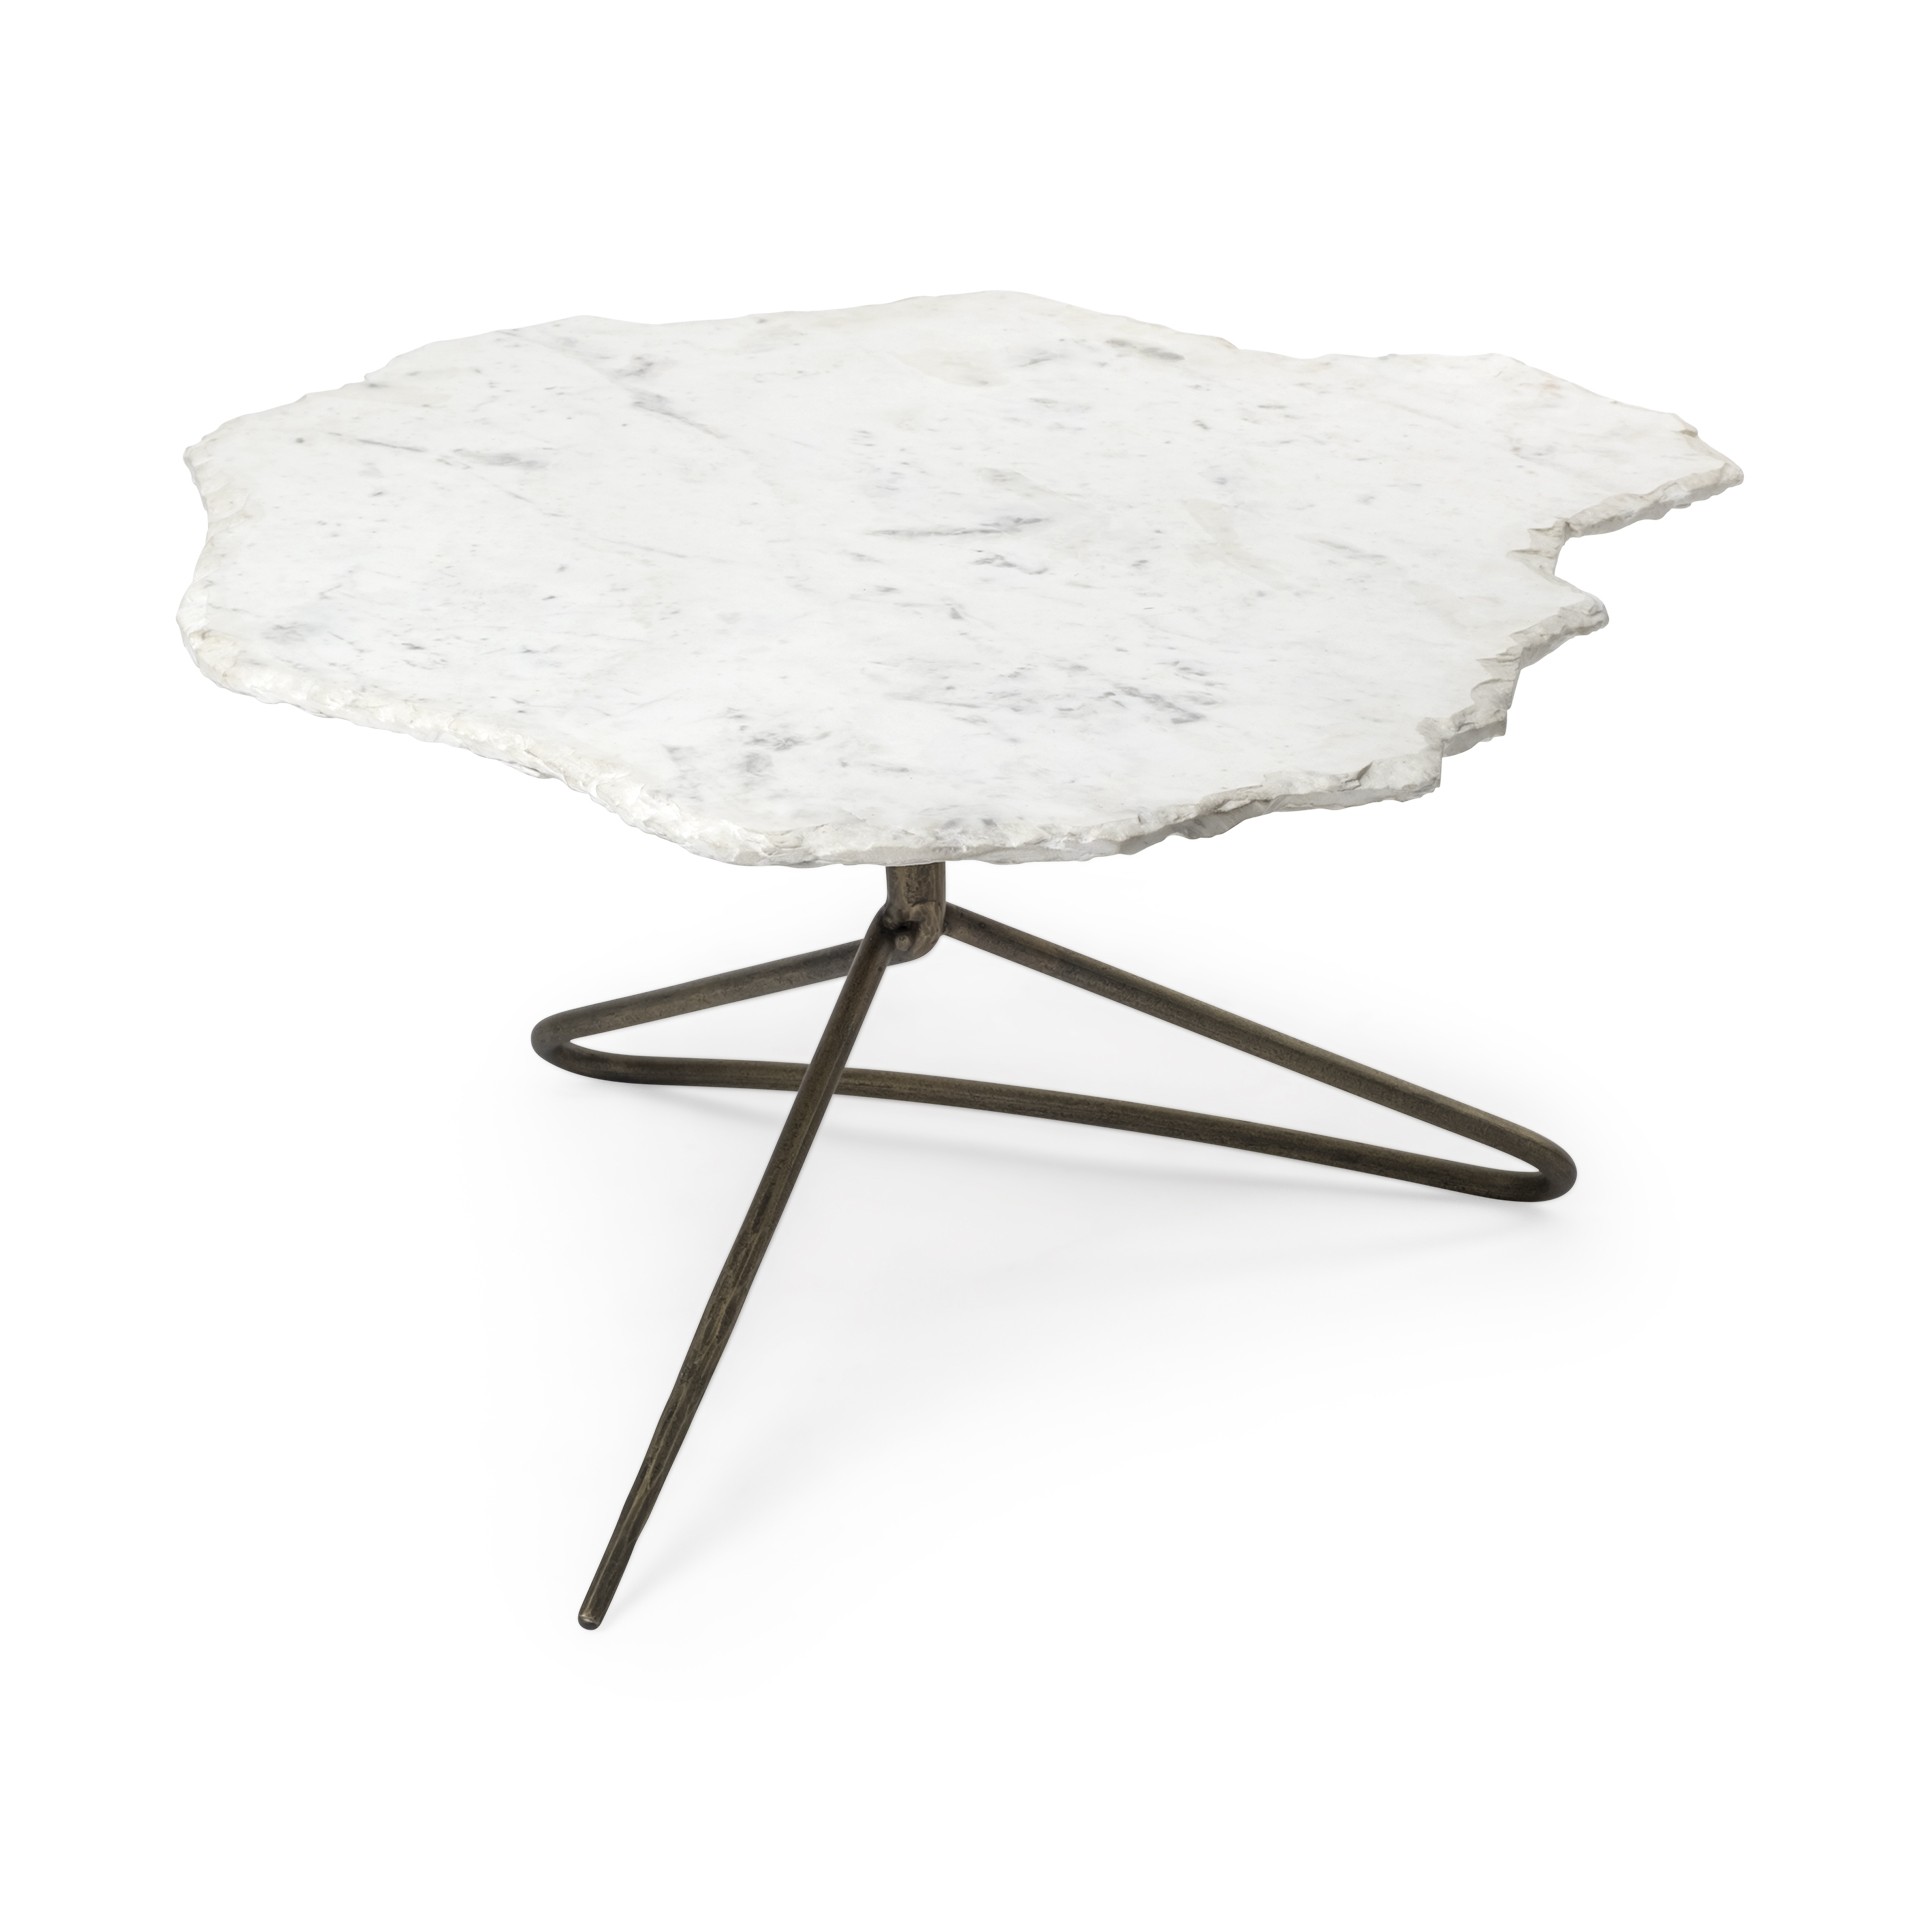 Irregular White Marble Top and Gold Metal Base Coffee Table